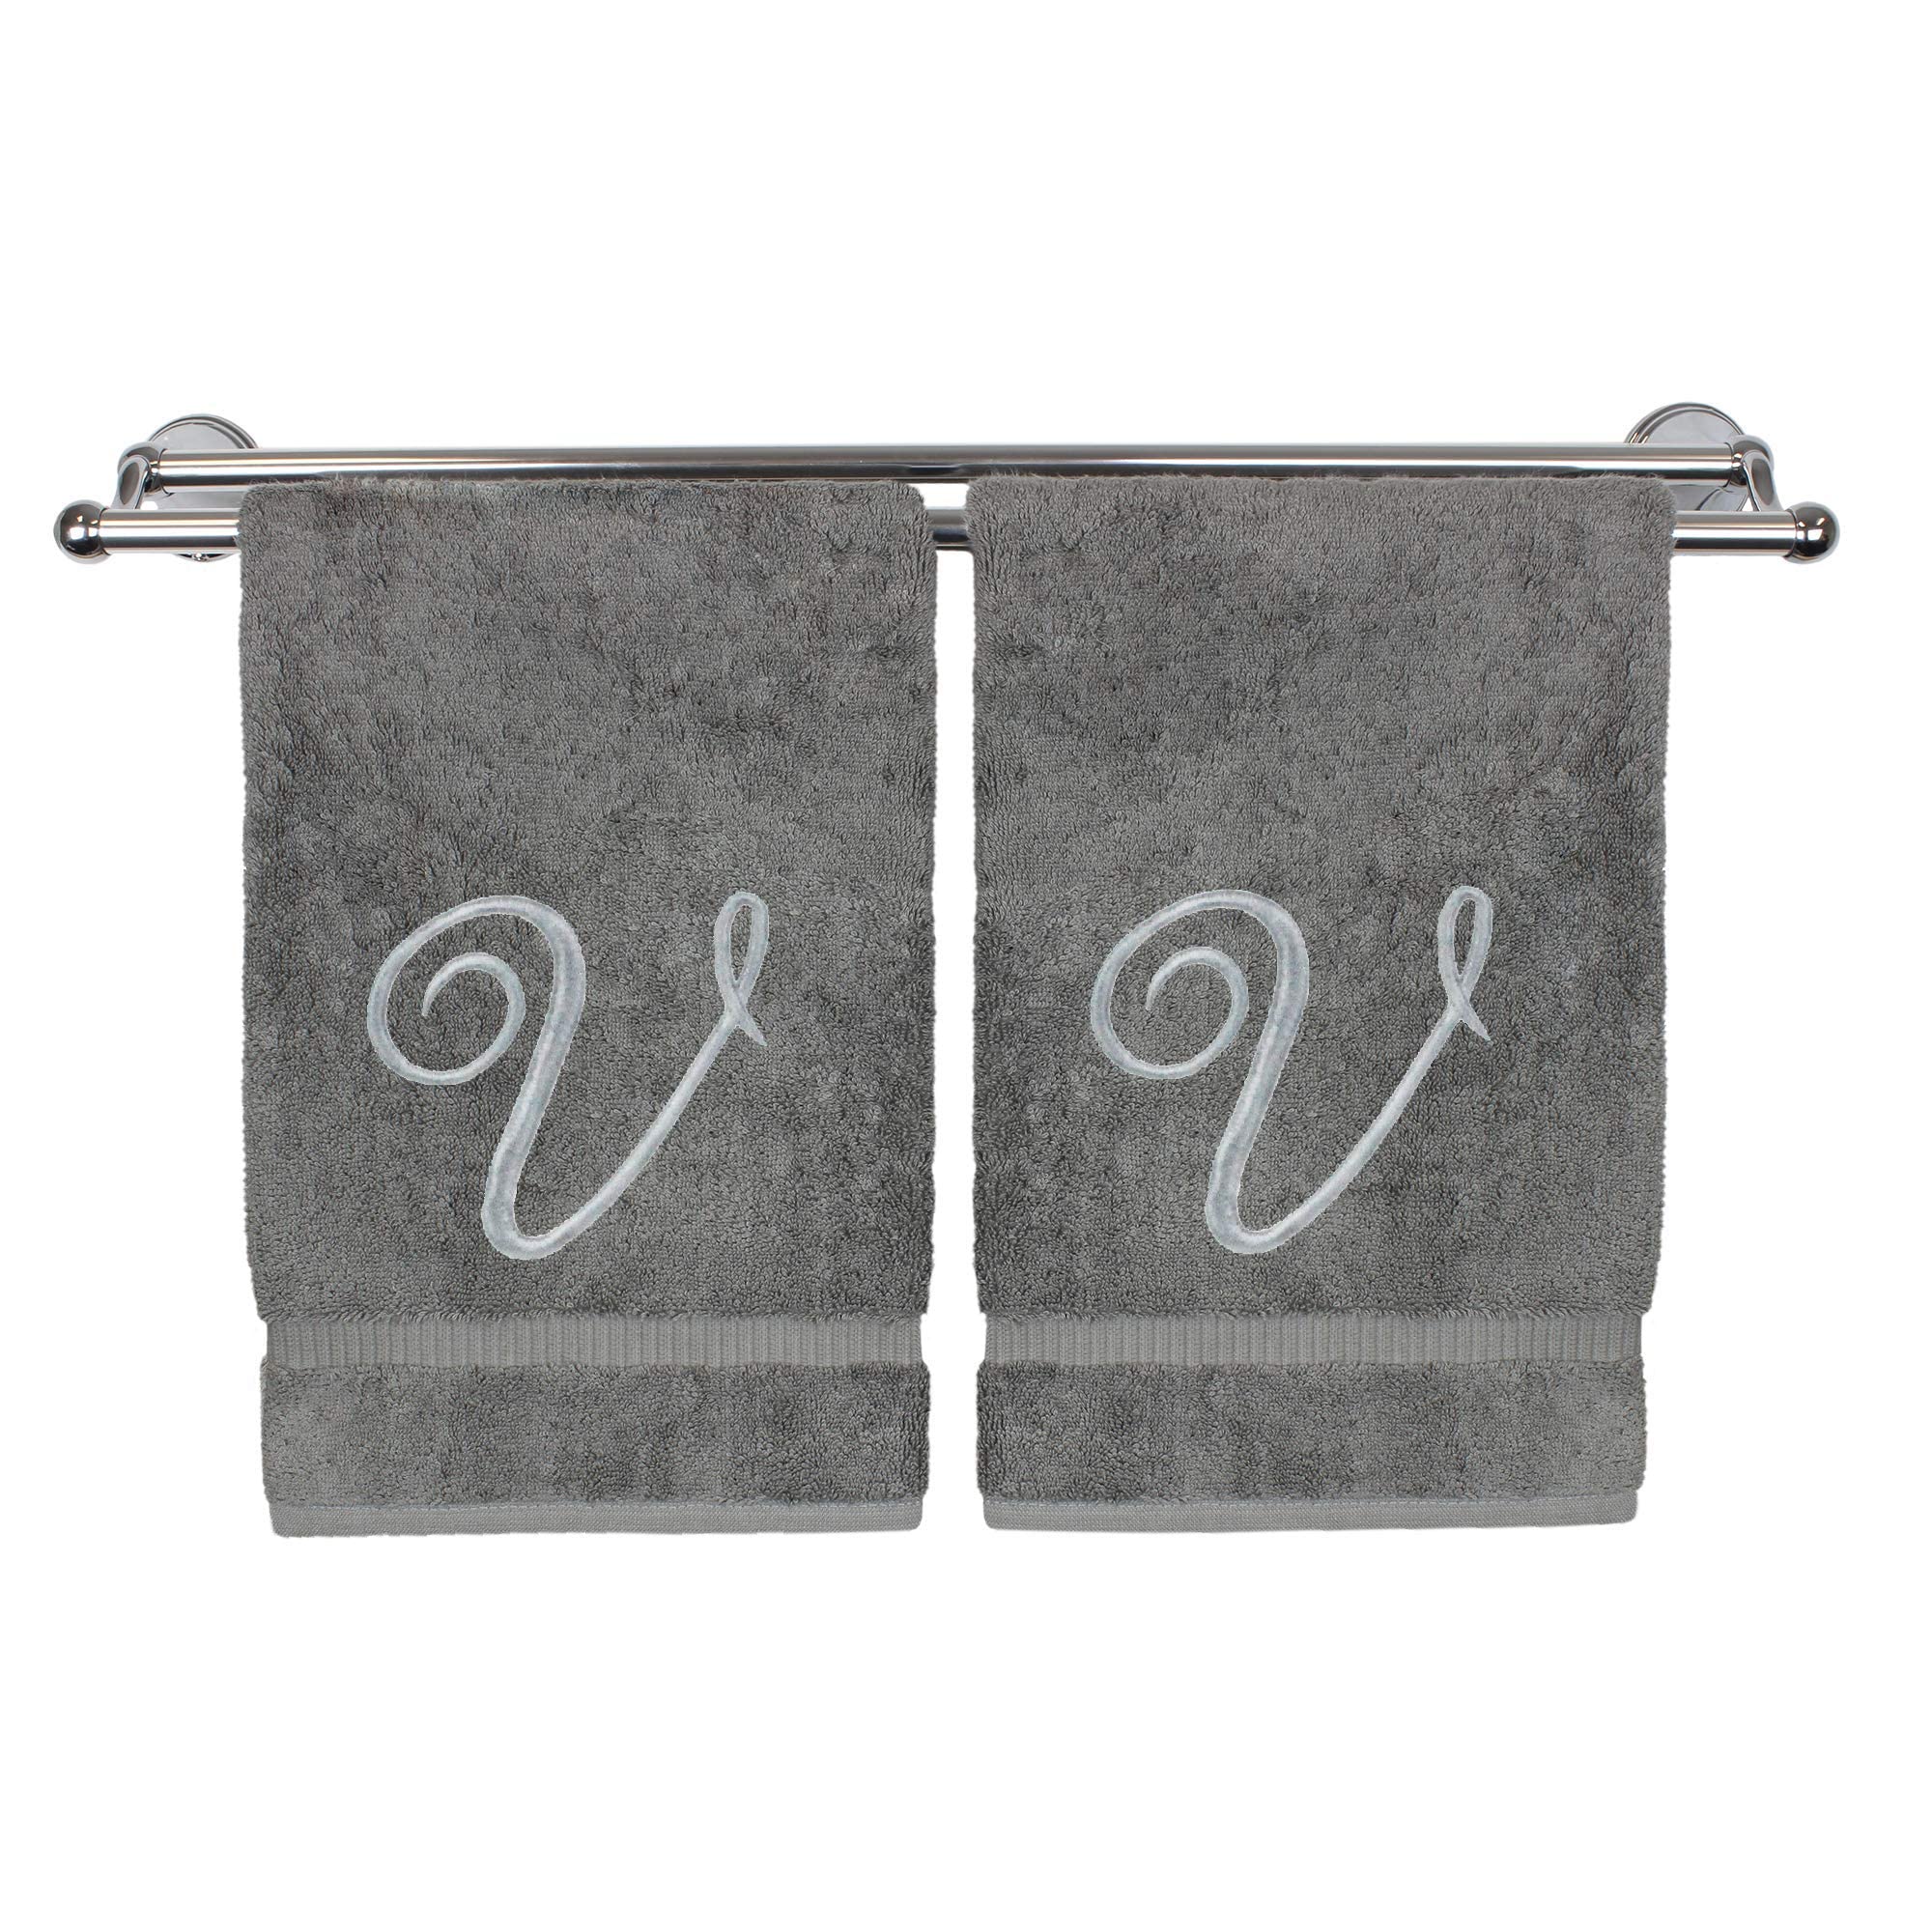 BC BARE COTTON Monogrammed Hand Towel, Personalized Gift, 16 X 30 Inches - Set Of 2 - Silver Embroidered Towel - Extra Absorbent 100 Turkish Co